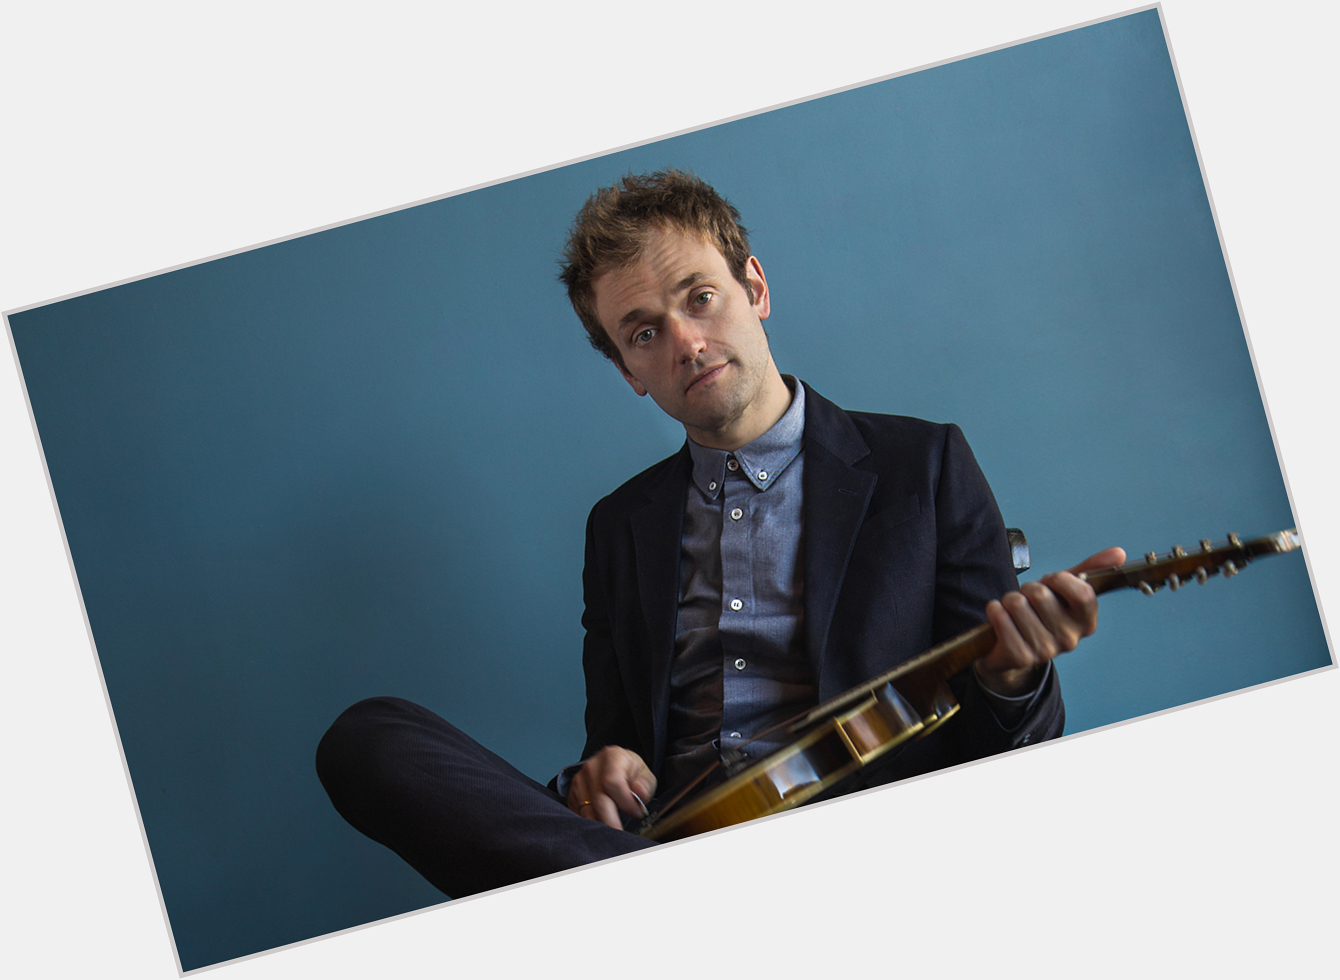 Please join me here at in wishing the one and only Chris Thile a very Happy 40th Birthday today  